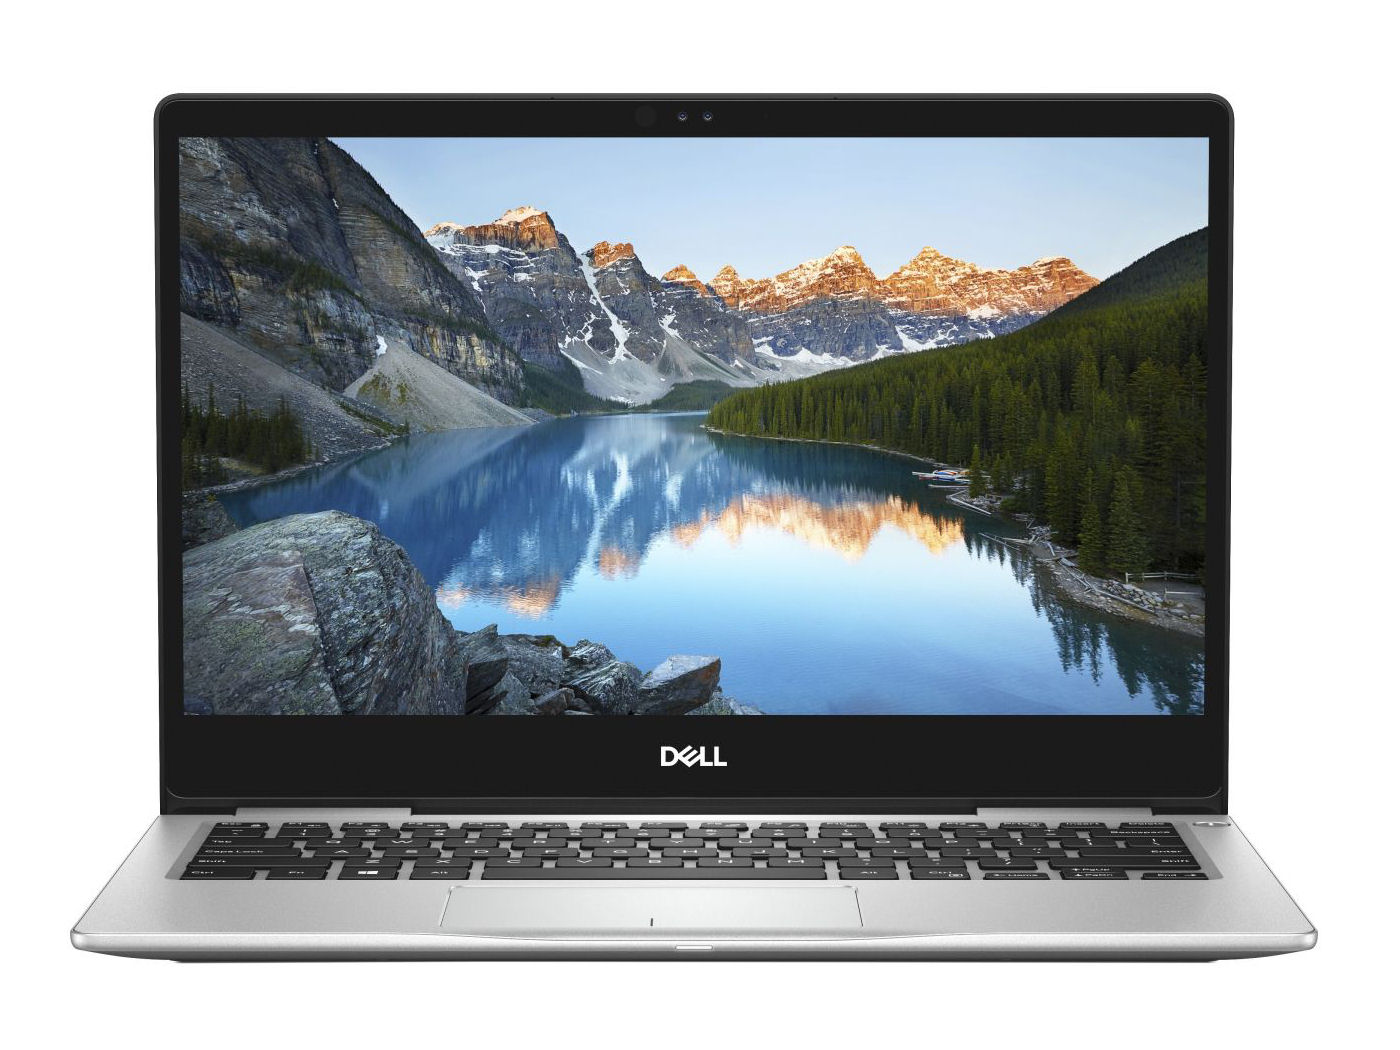 Dell Inspiron 13 7380 (Core i7-8565U, SSD, FHD) Laptop Review